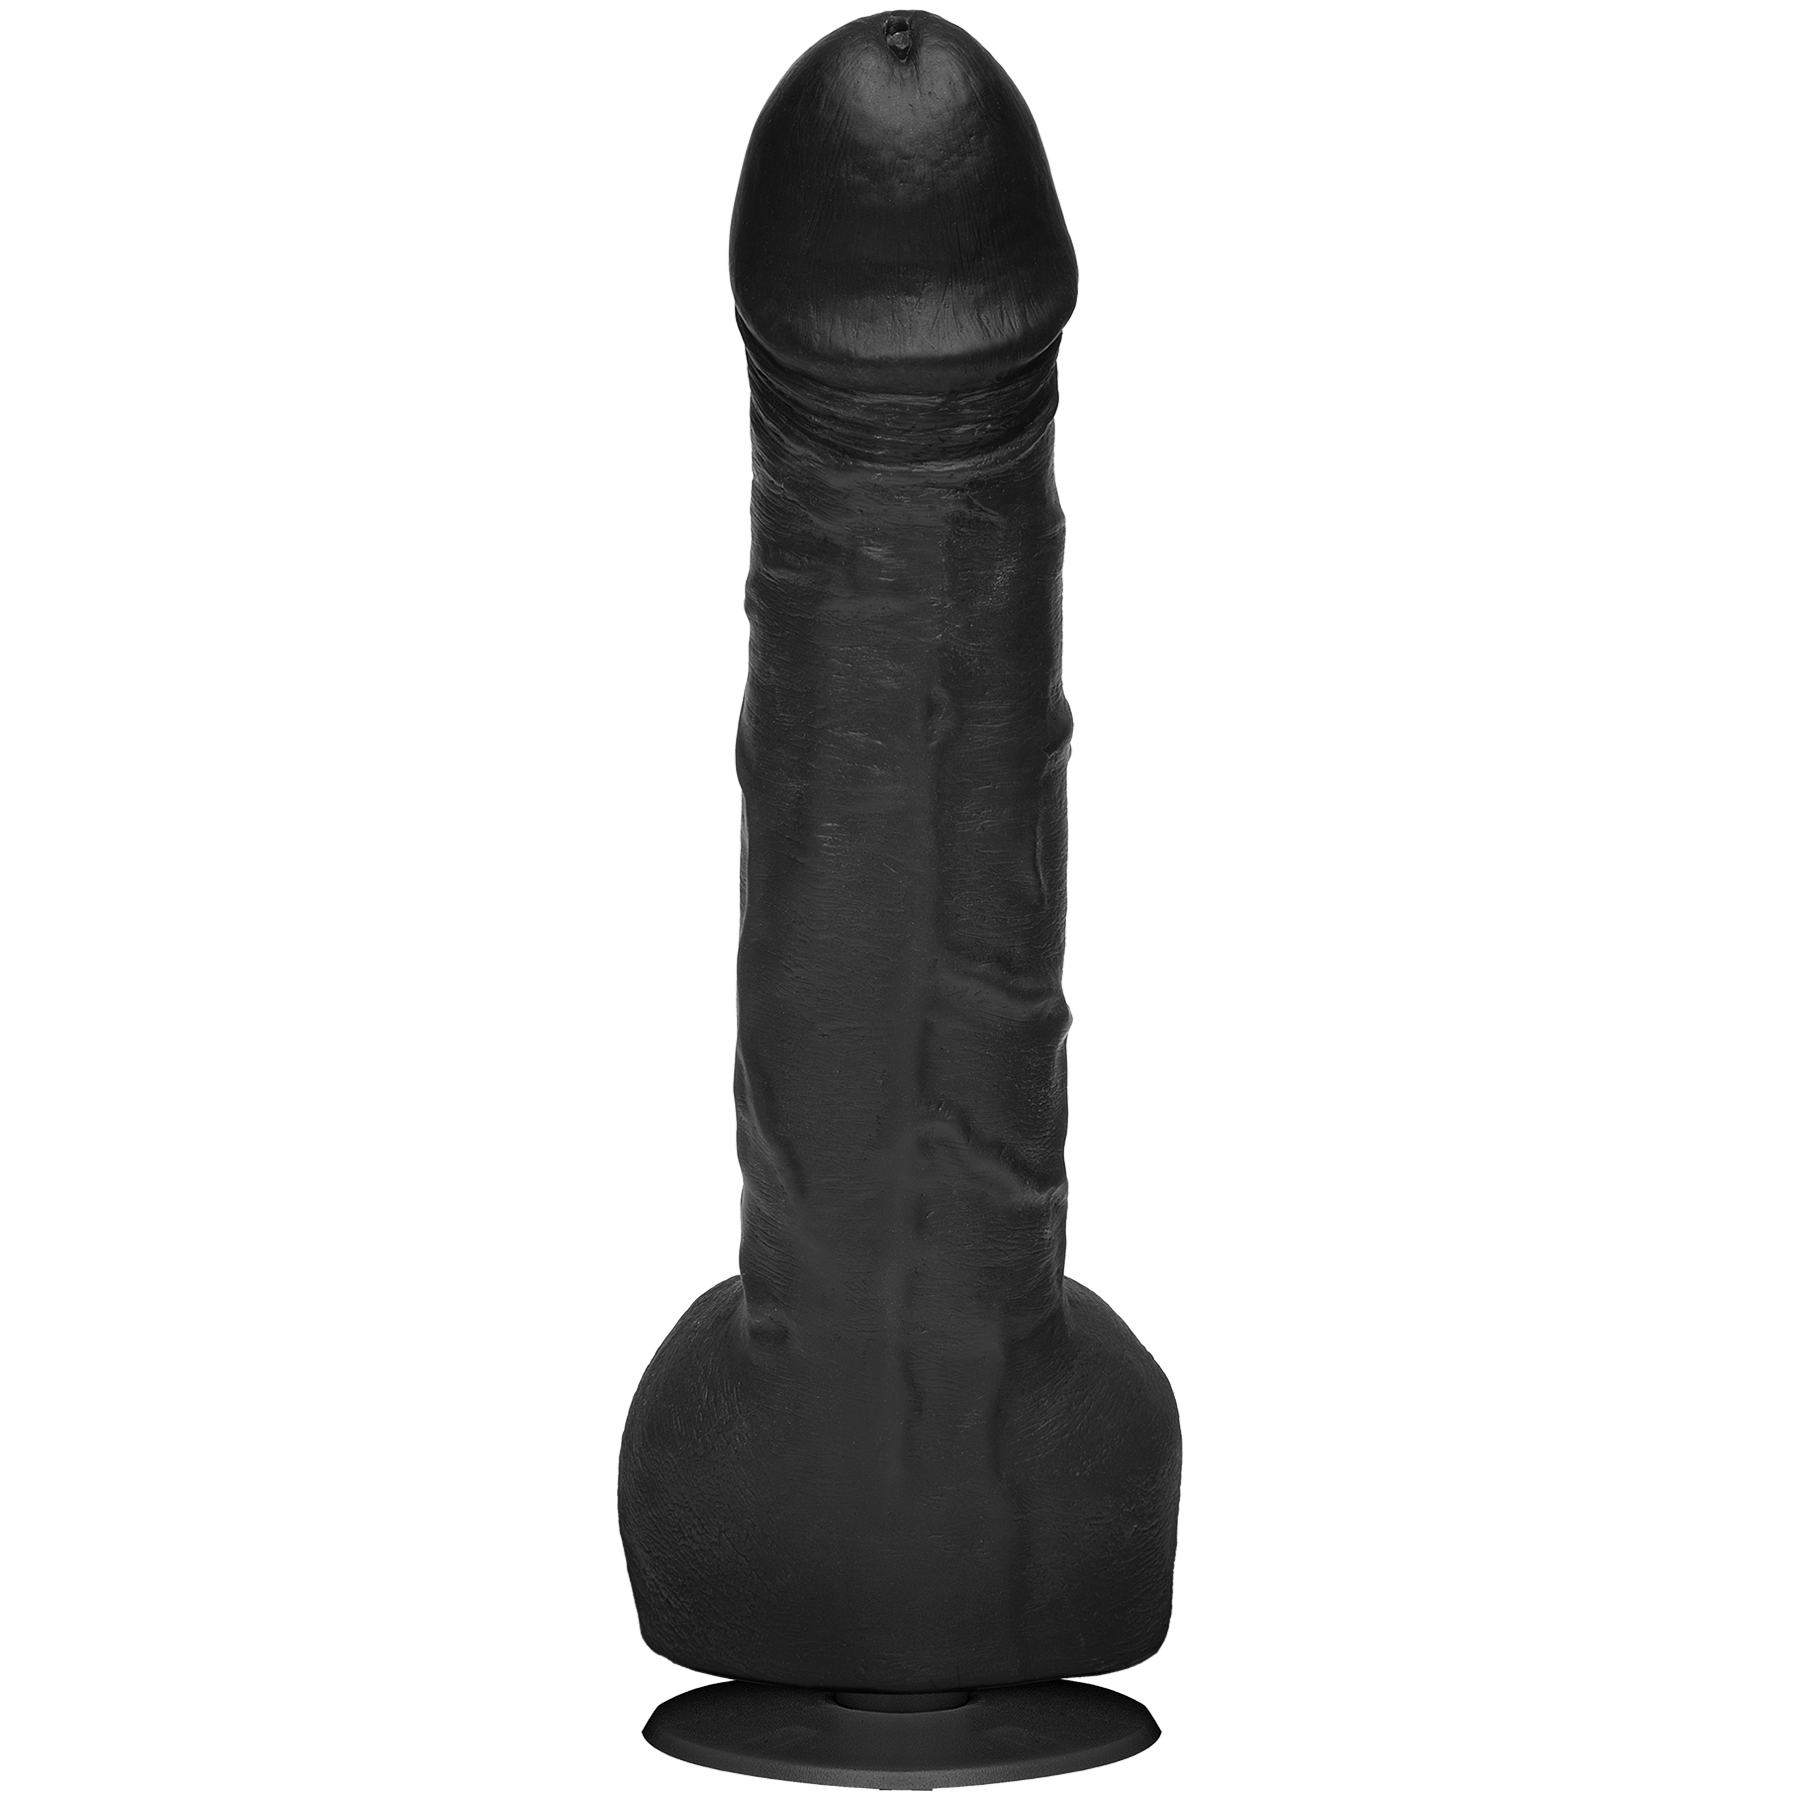 Merci 10 Inch Dual Density ULTRASKYN Squirting Cumplay Cock with Removable VacULock Suction Cup